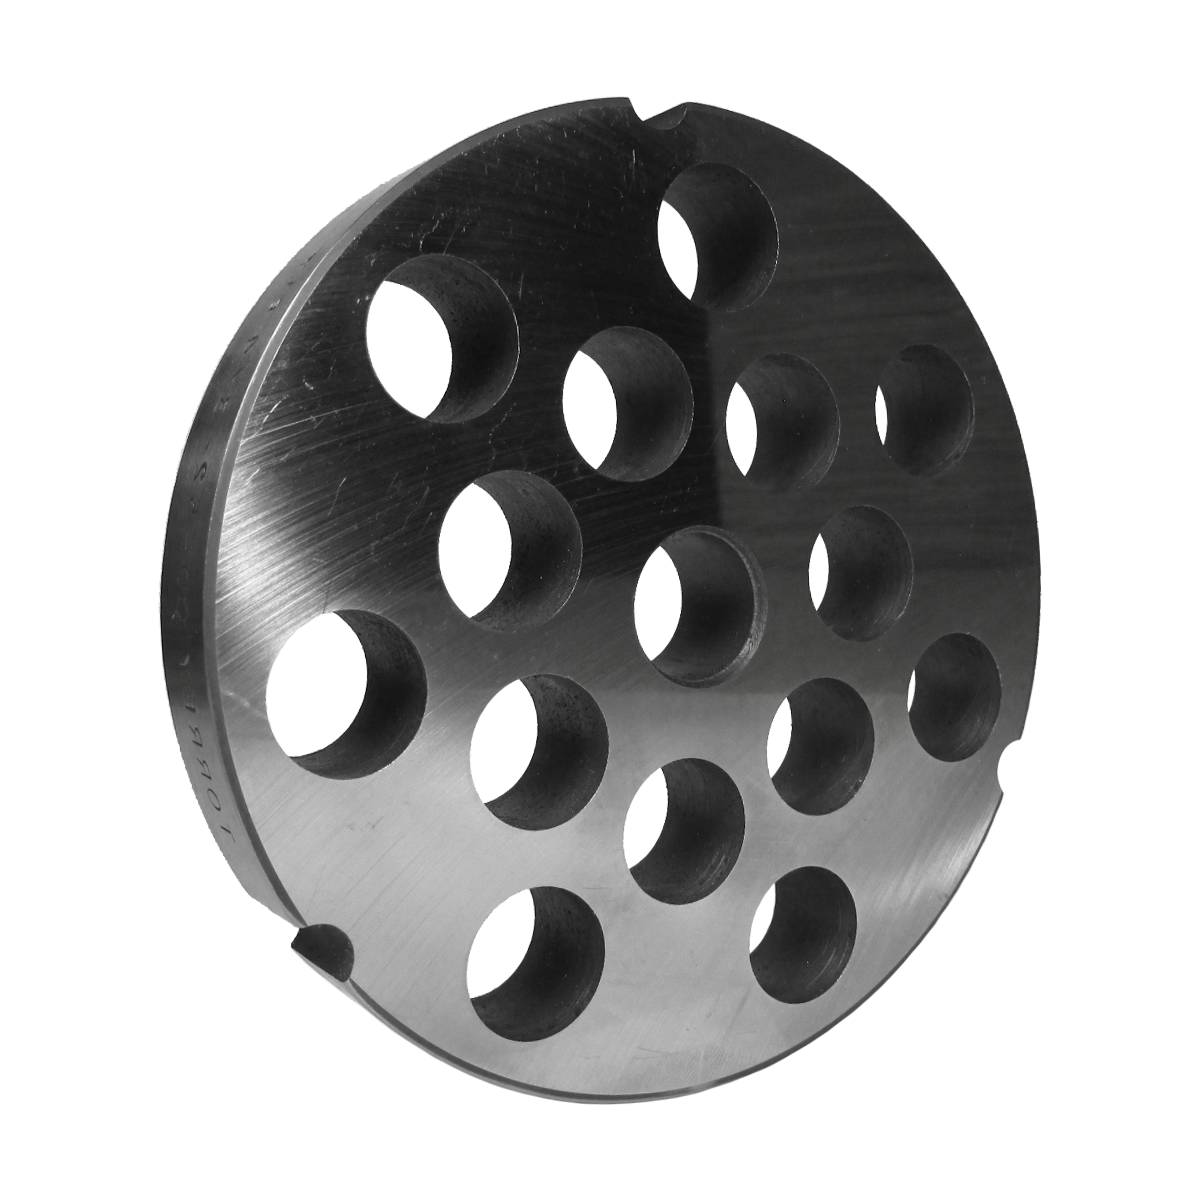 Grinder plate for #52 grinders with 1/2" hole, reversible